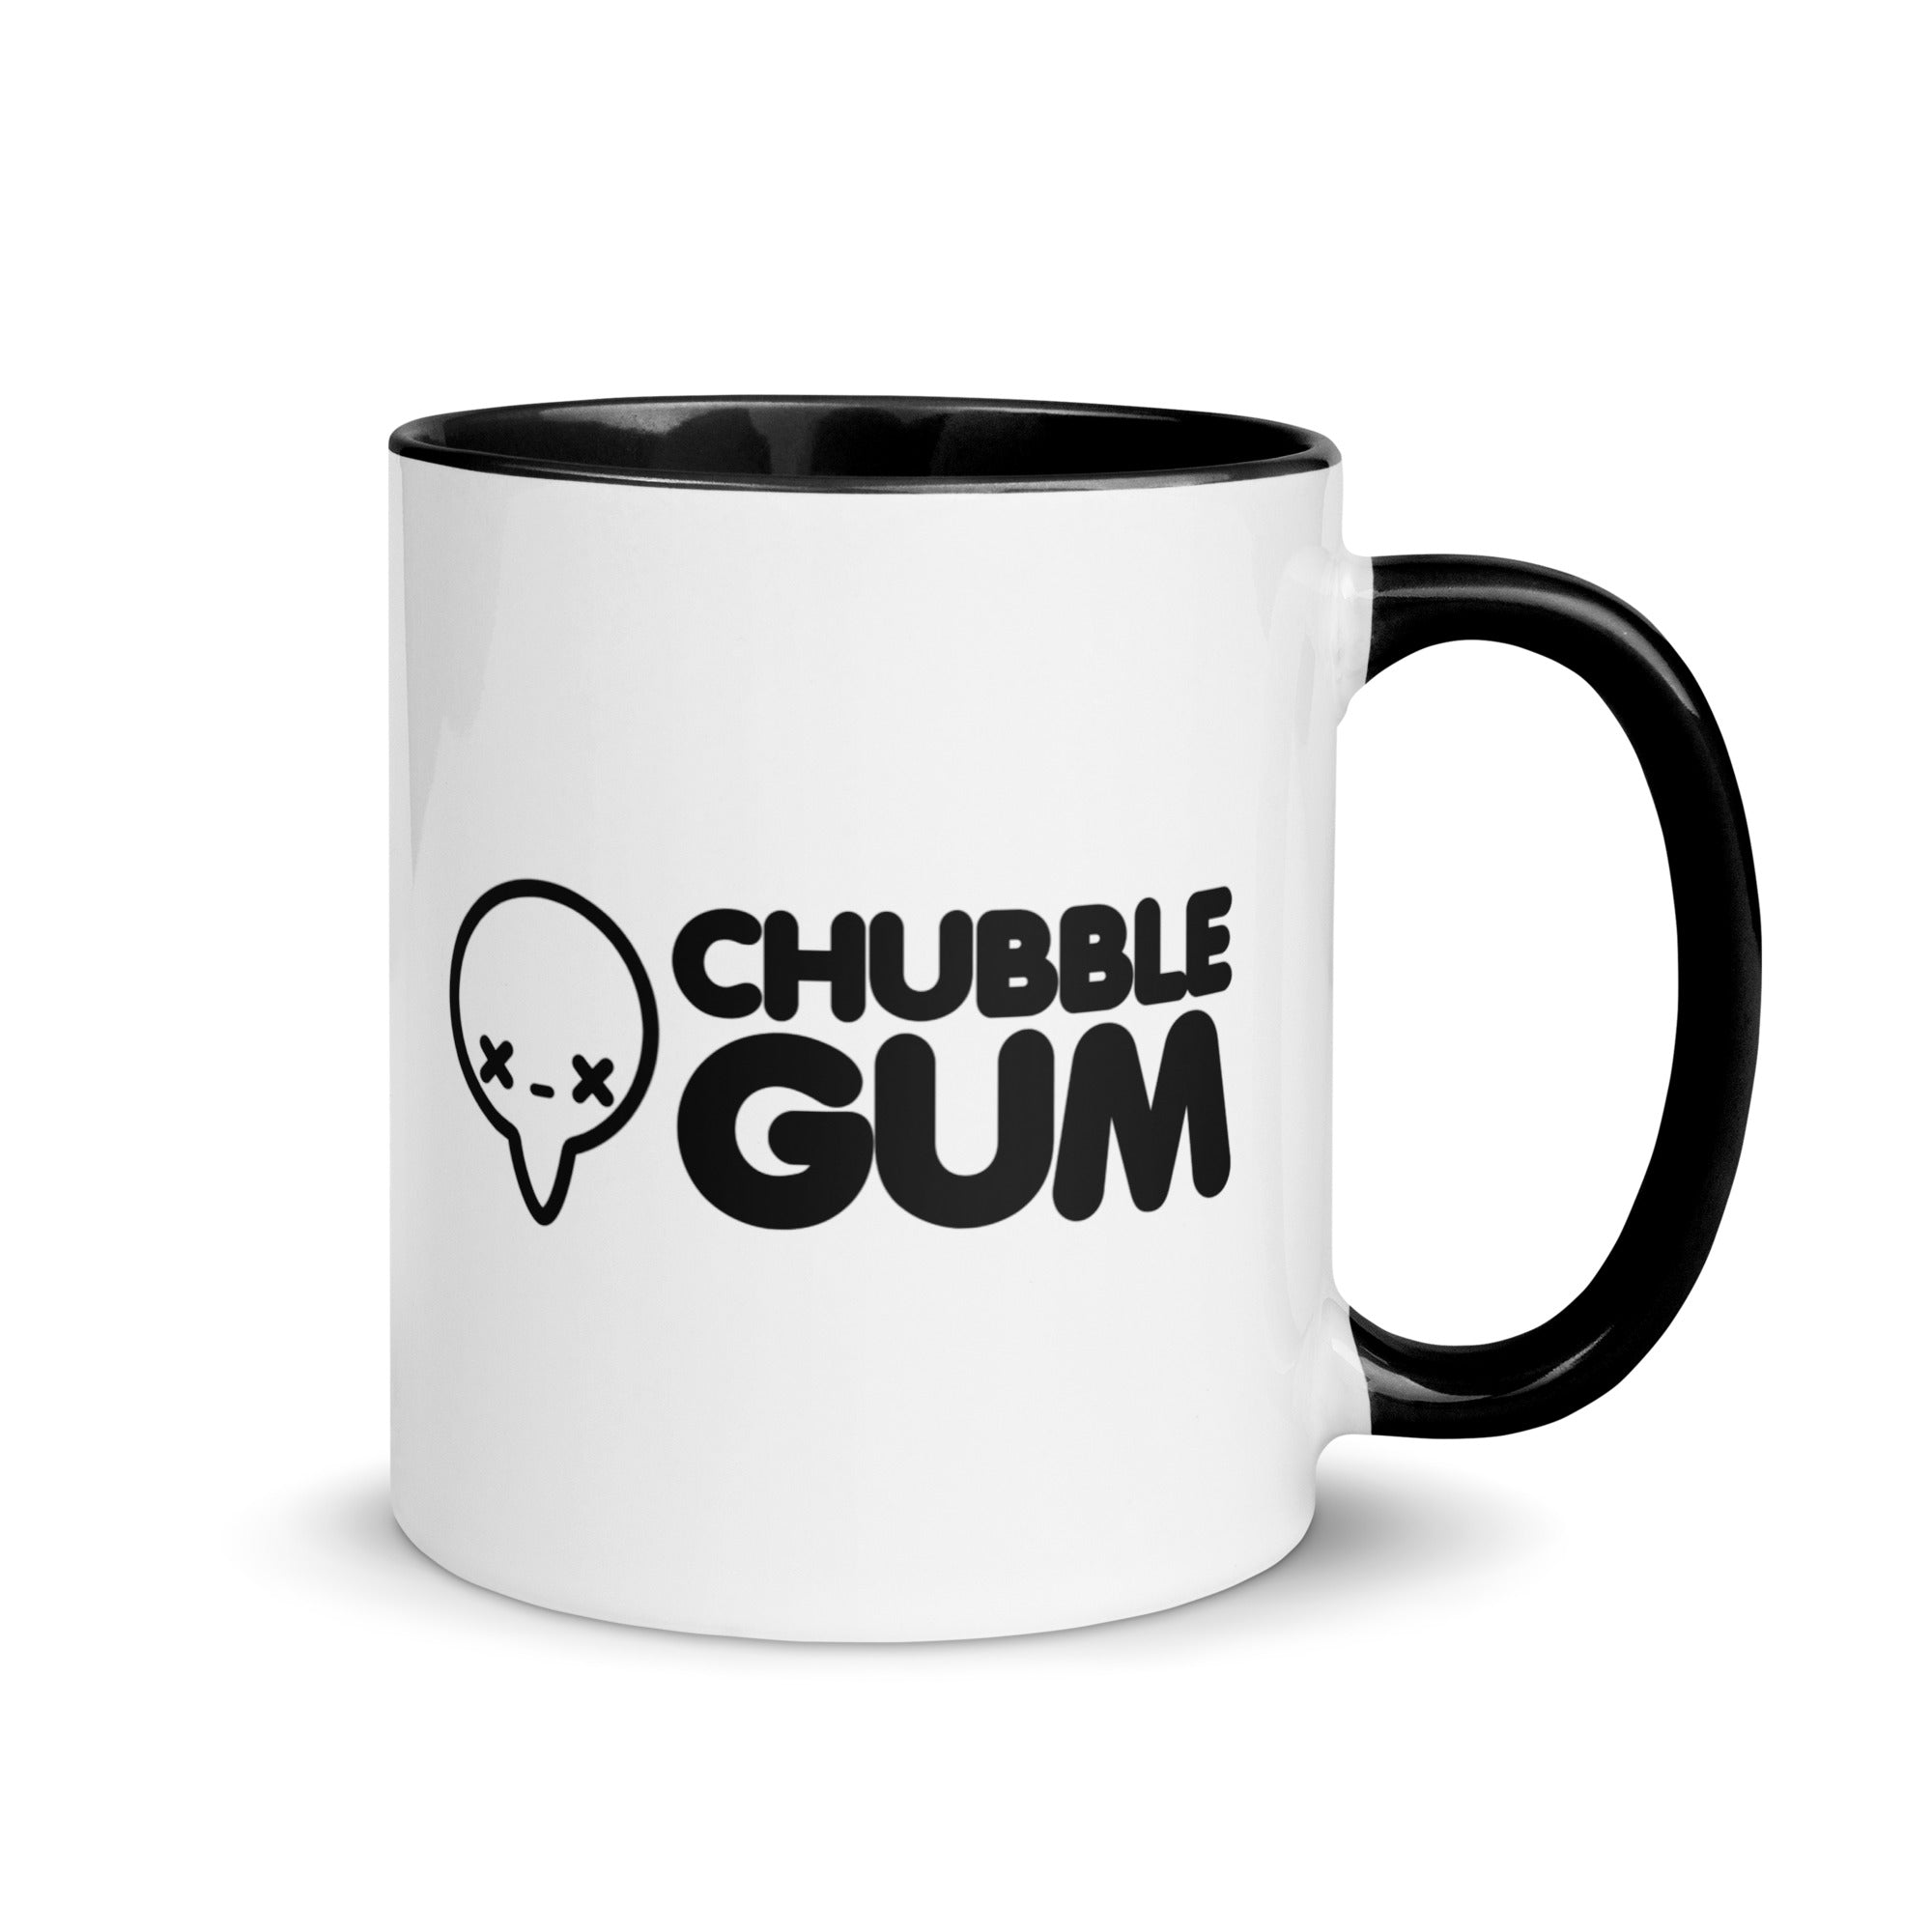 MY WEEKEND IS ALL BOOKED UP - Mug with Color Inside - ChubbleGumLLC